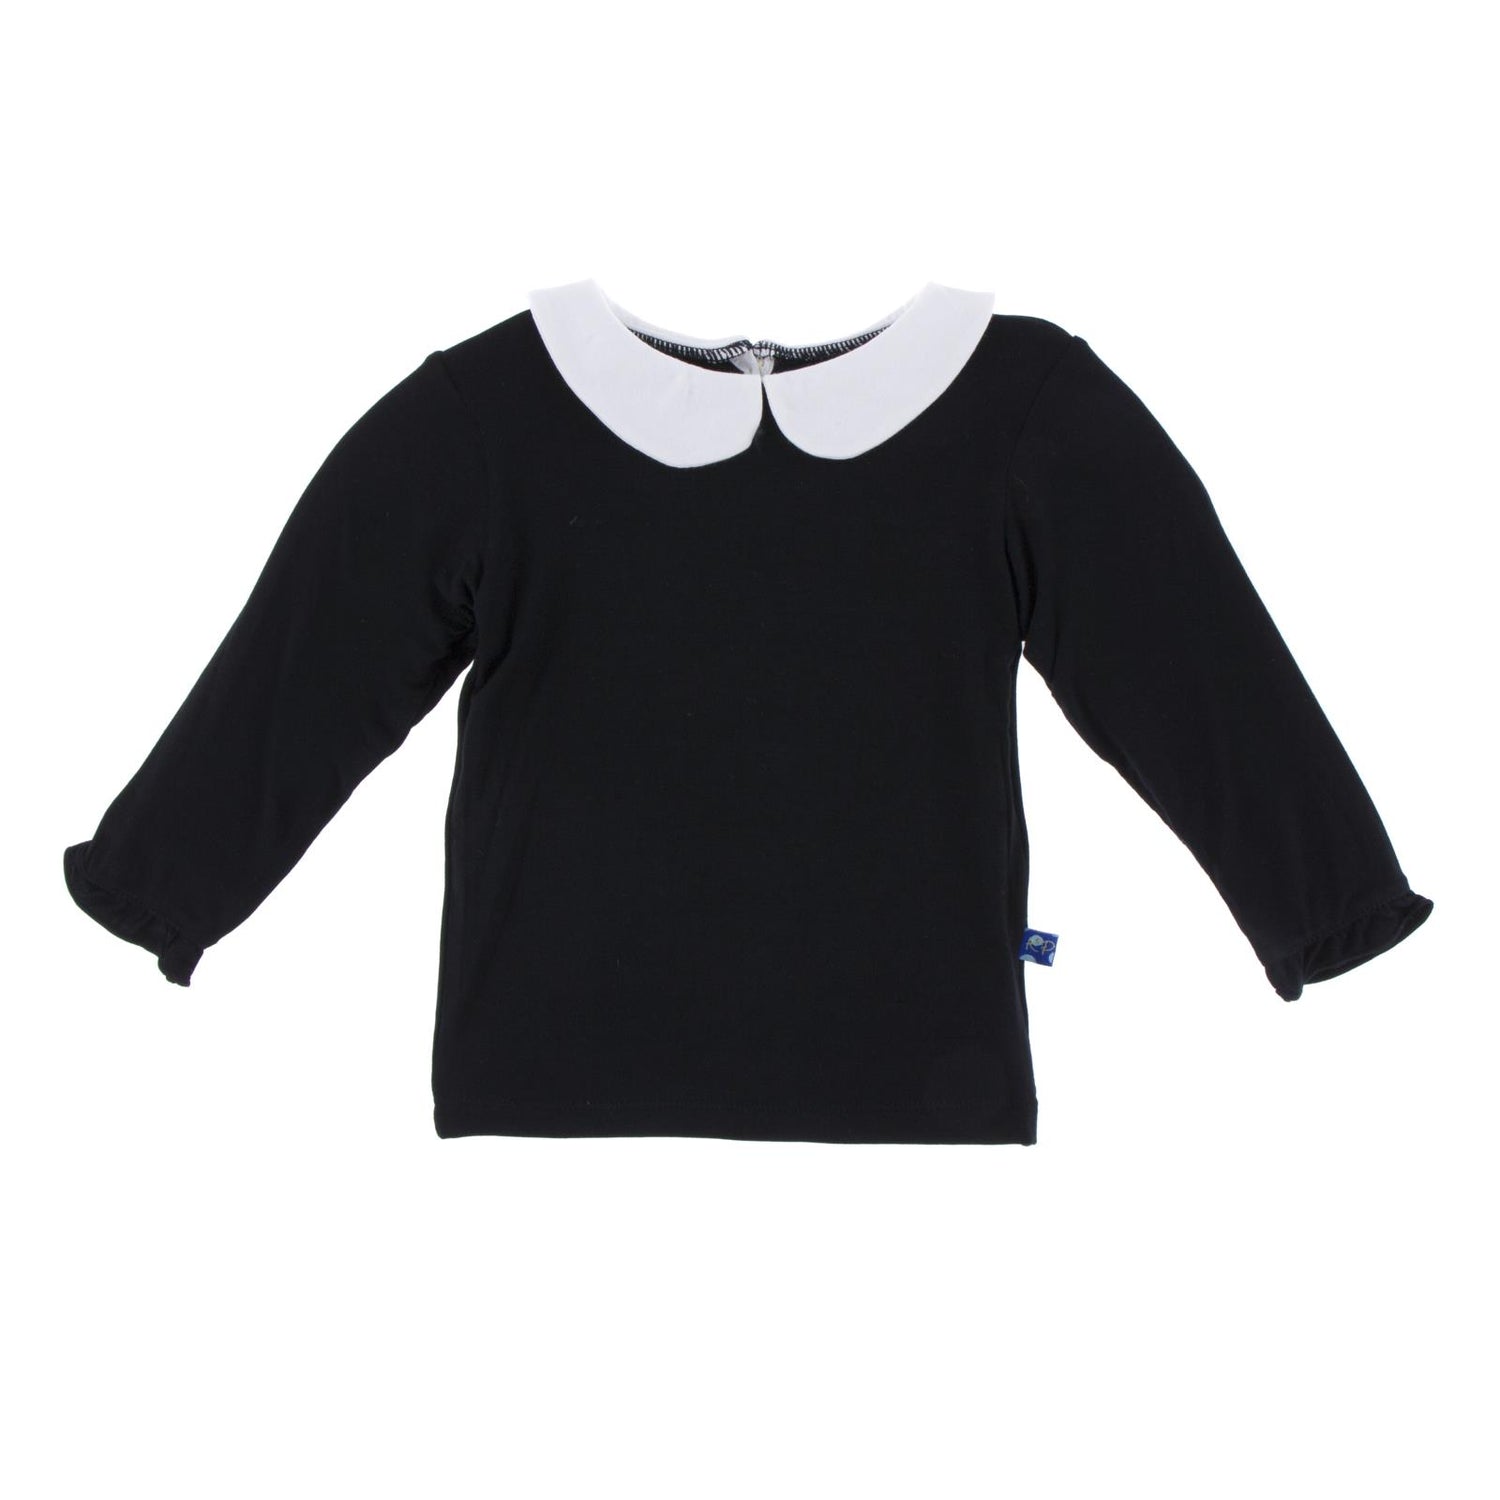 Long Sleeve Peter Pan Collared Tee in Midnight with Natural Trim